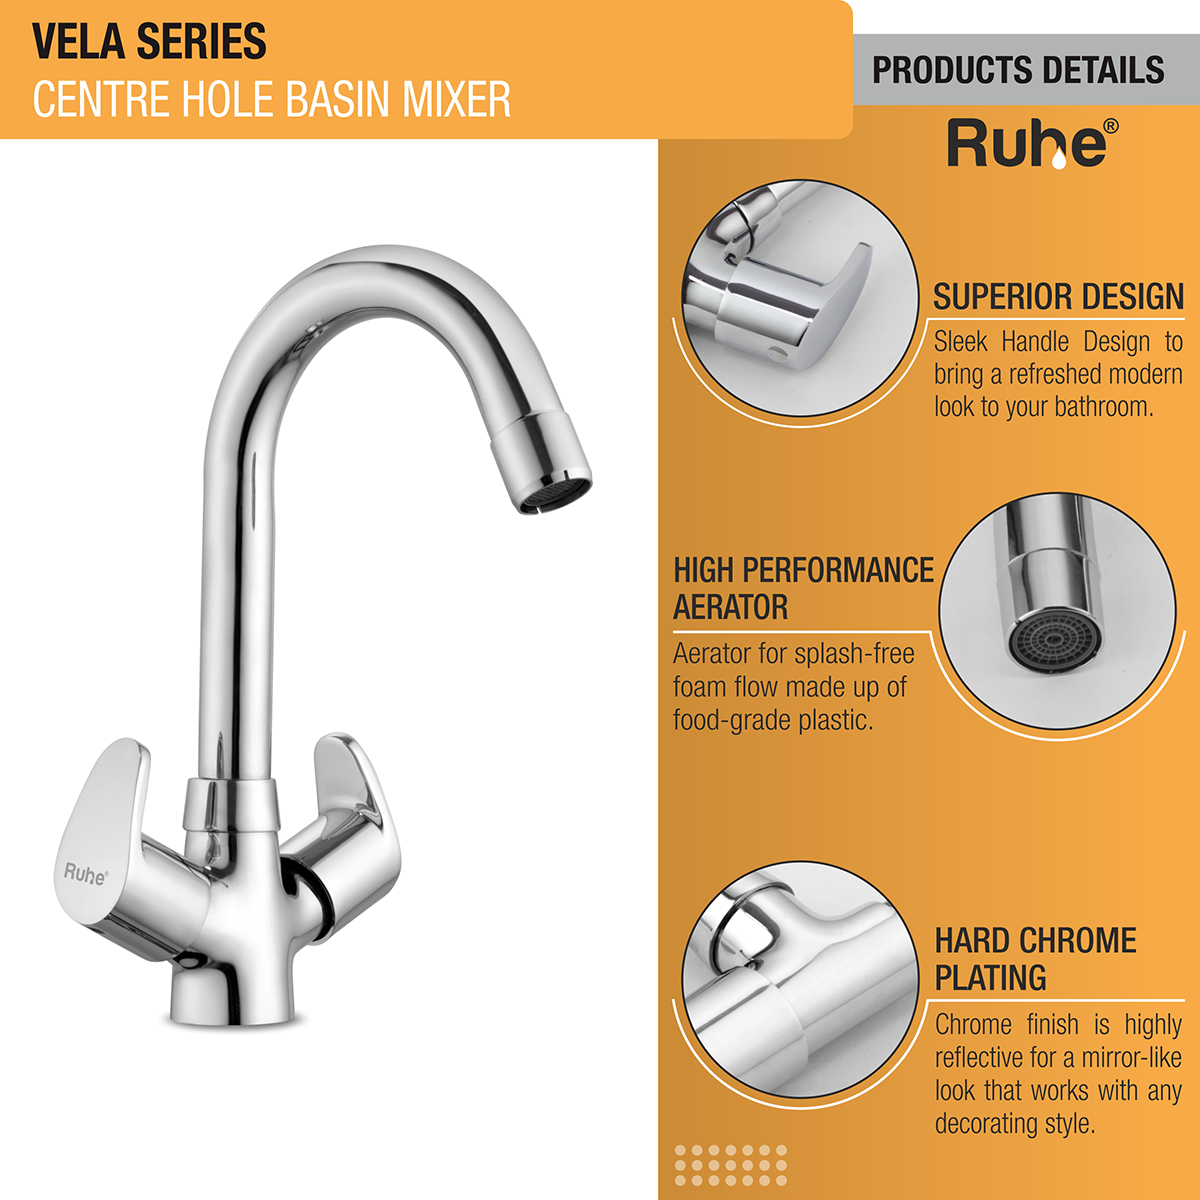 Vela Centre Hole Basin Mixer with Small (12 inches) Round Swivel Spout Faucet product details